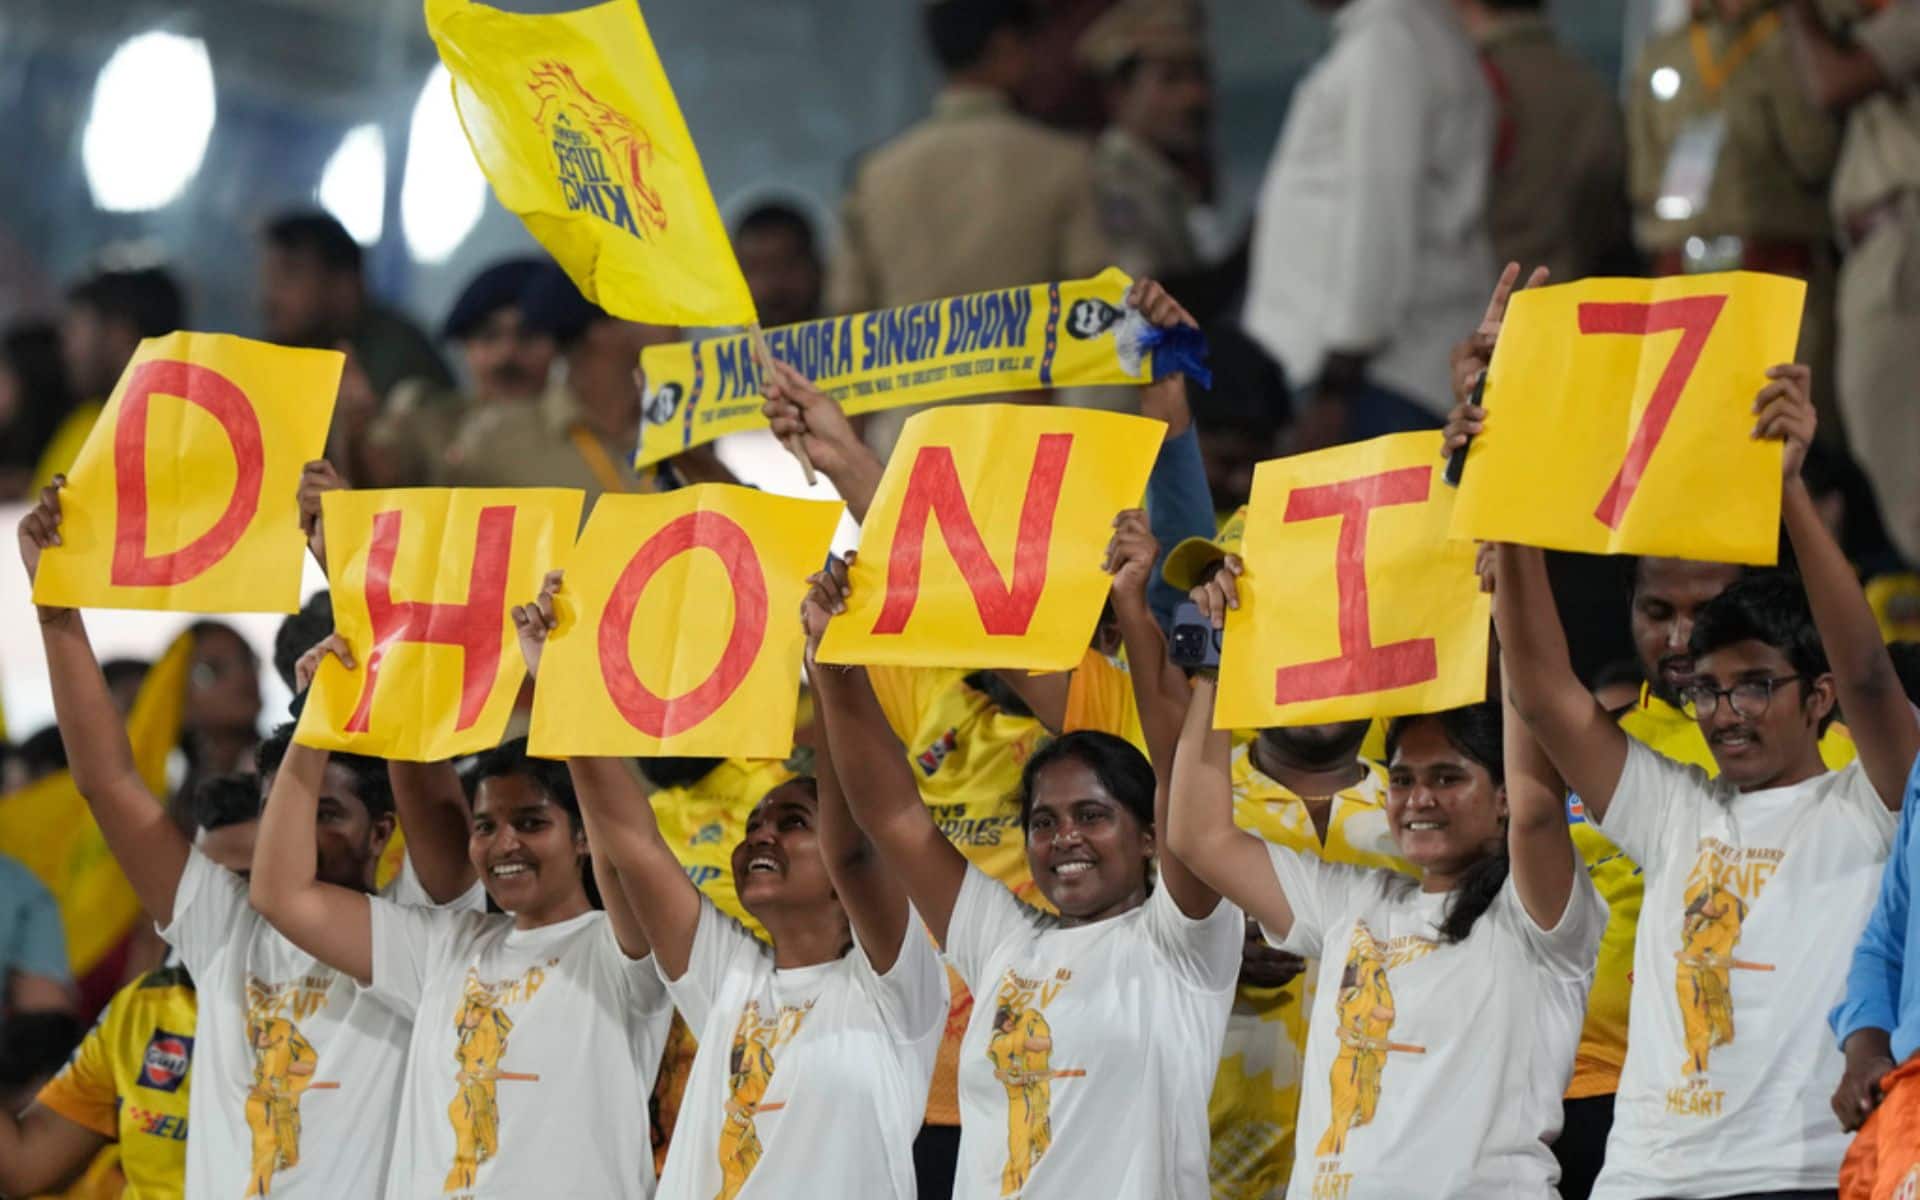 MS Dhoni was a fan favourite in Hyderabad on Friday (AP)